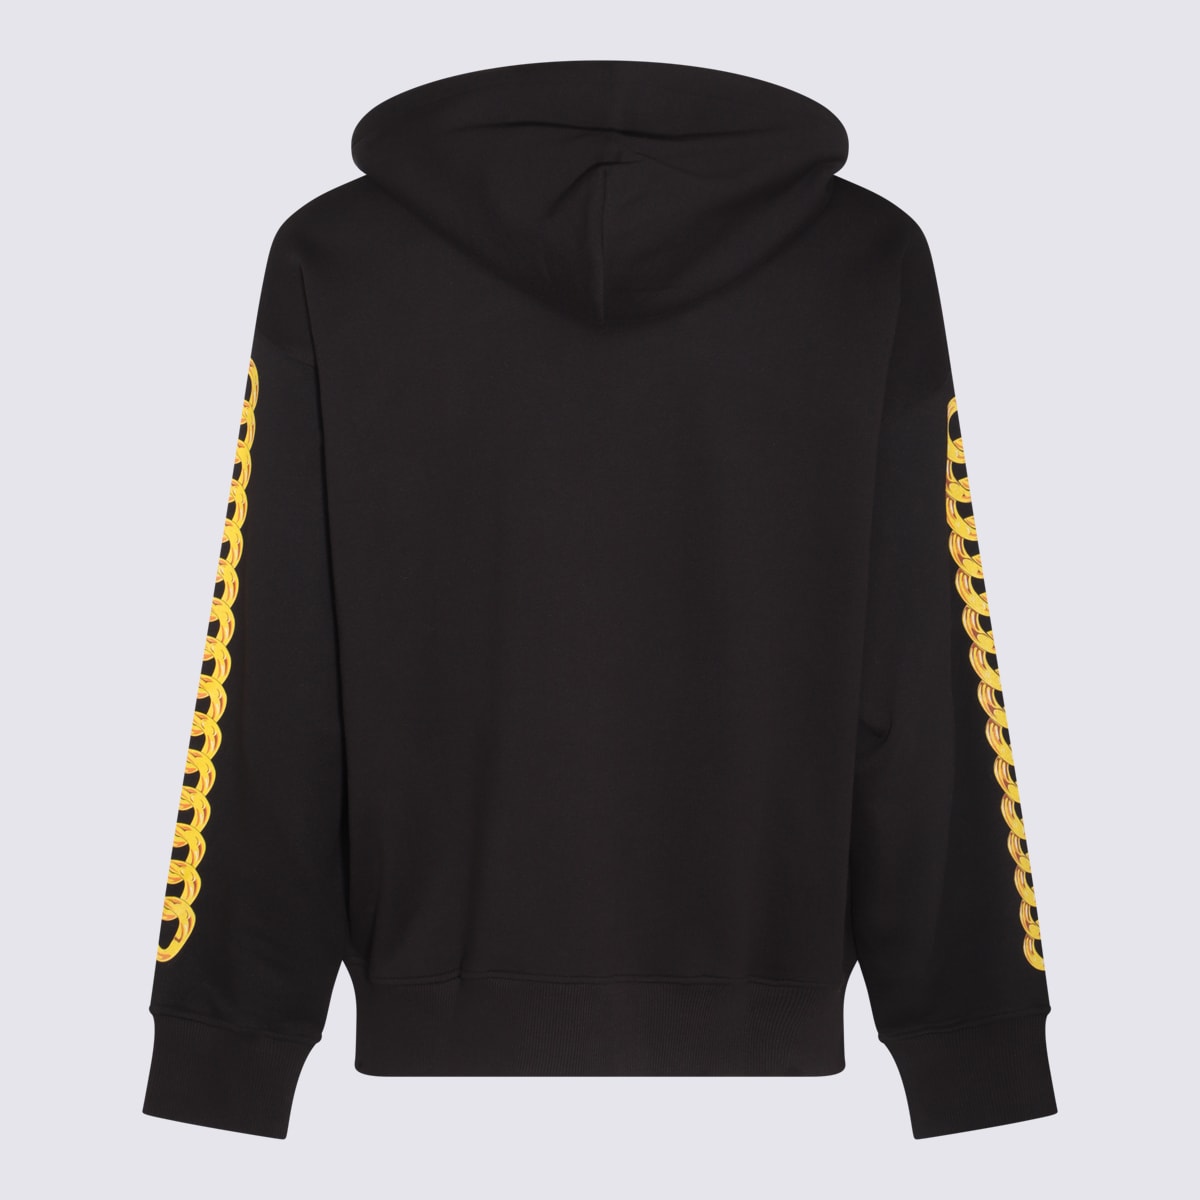 Shop Versace Jeans Couture Black, Yellow And White Cotton Sweatshirt